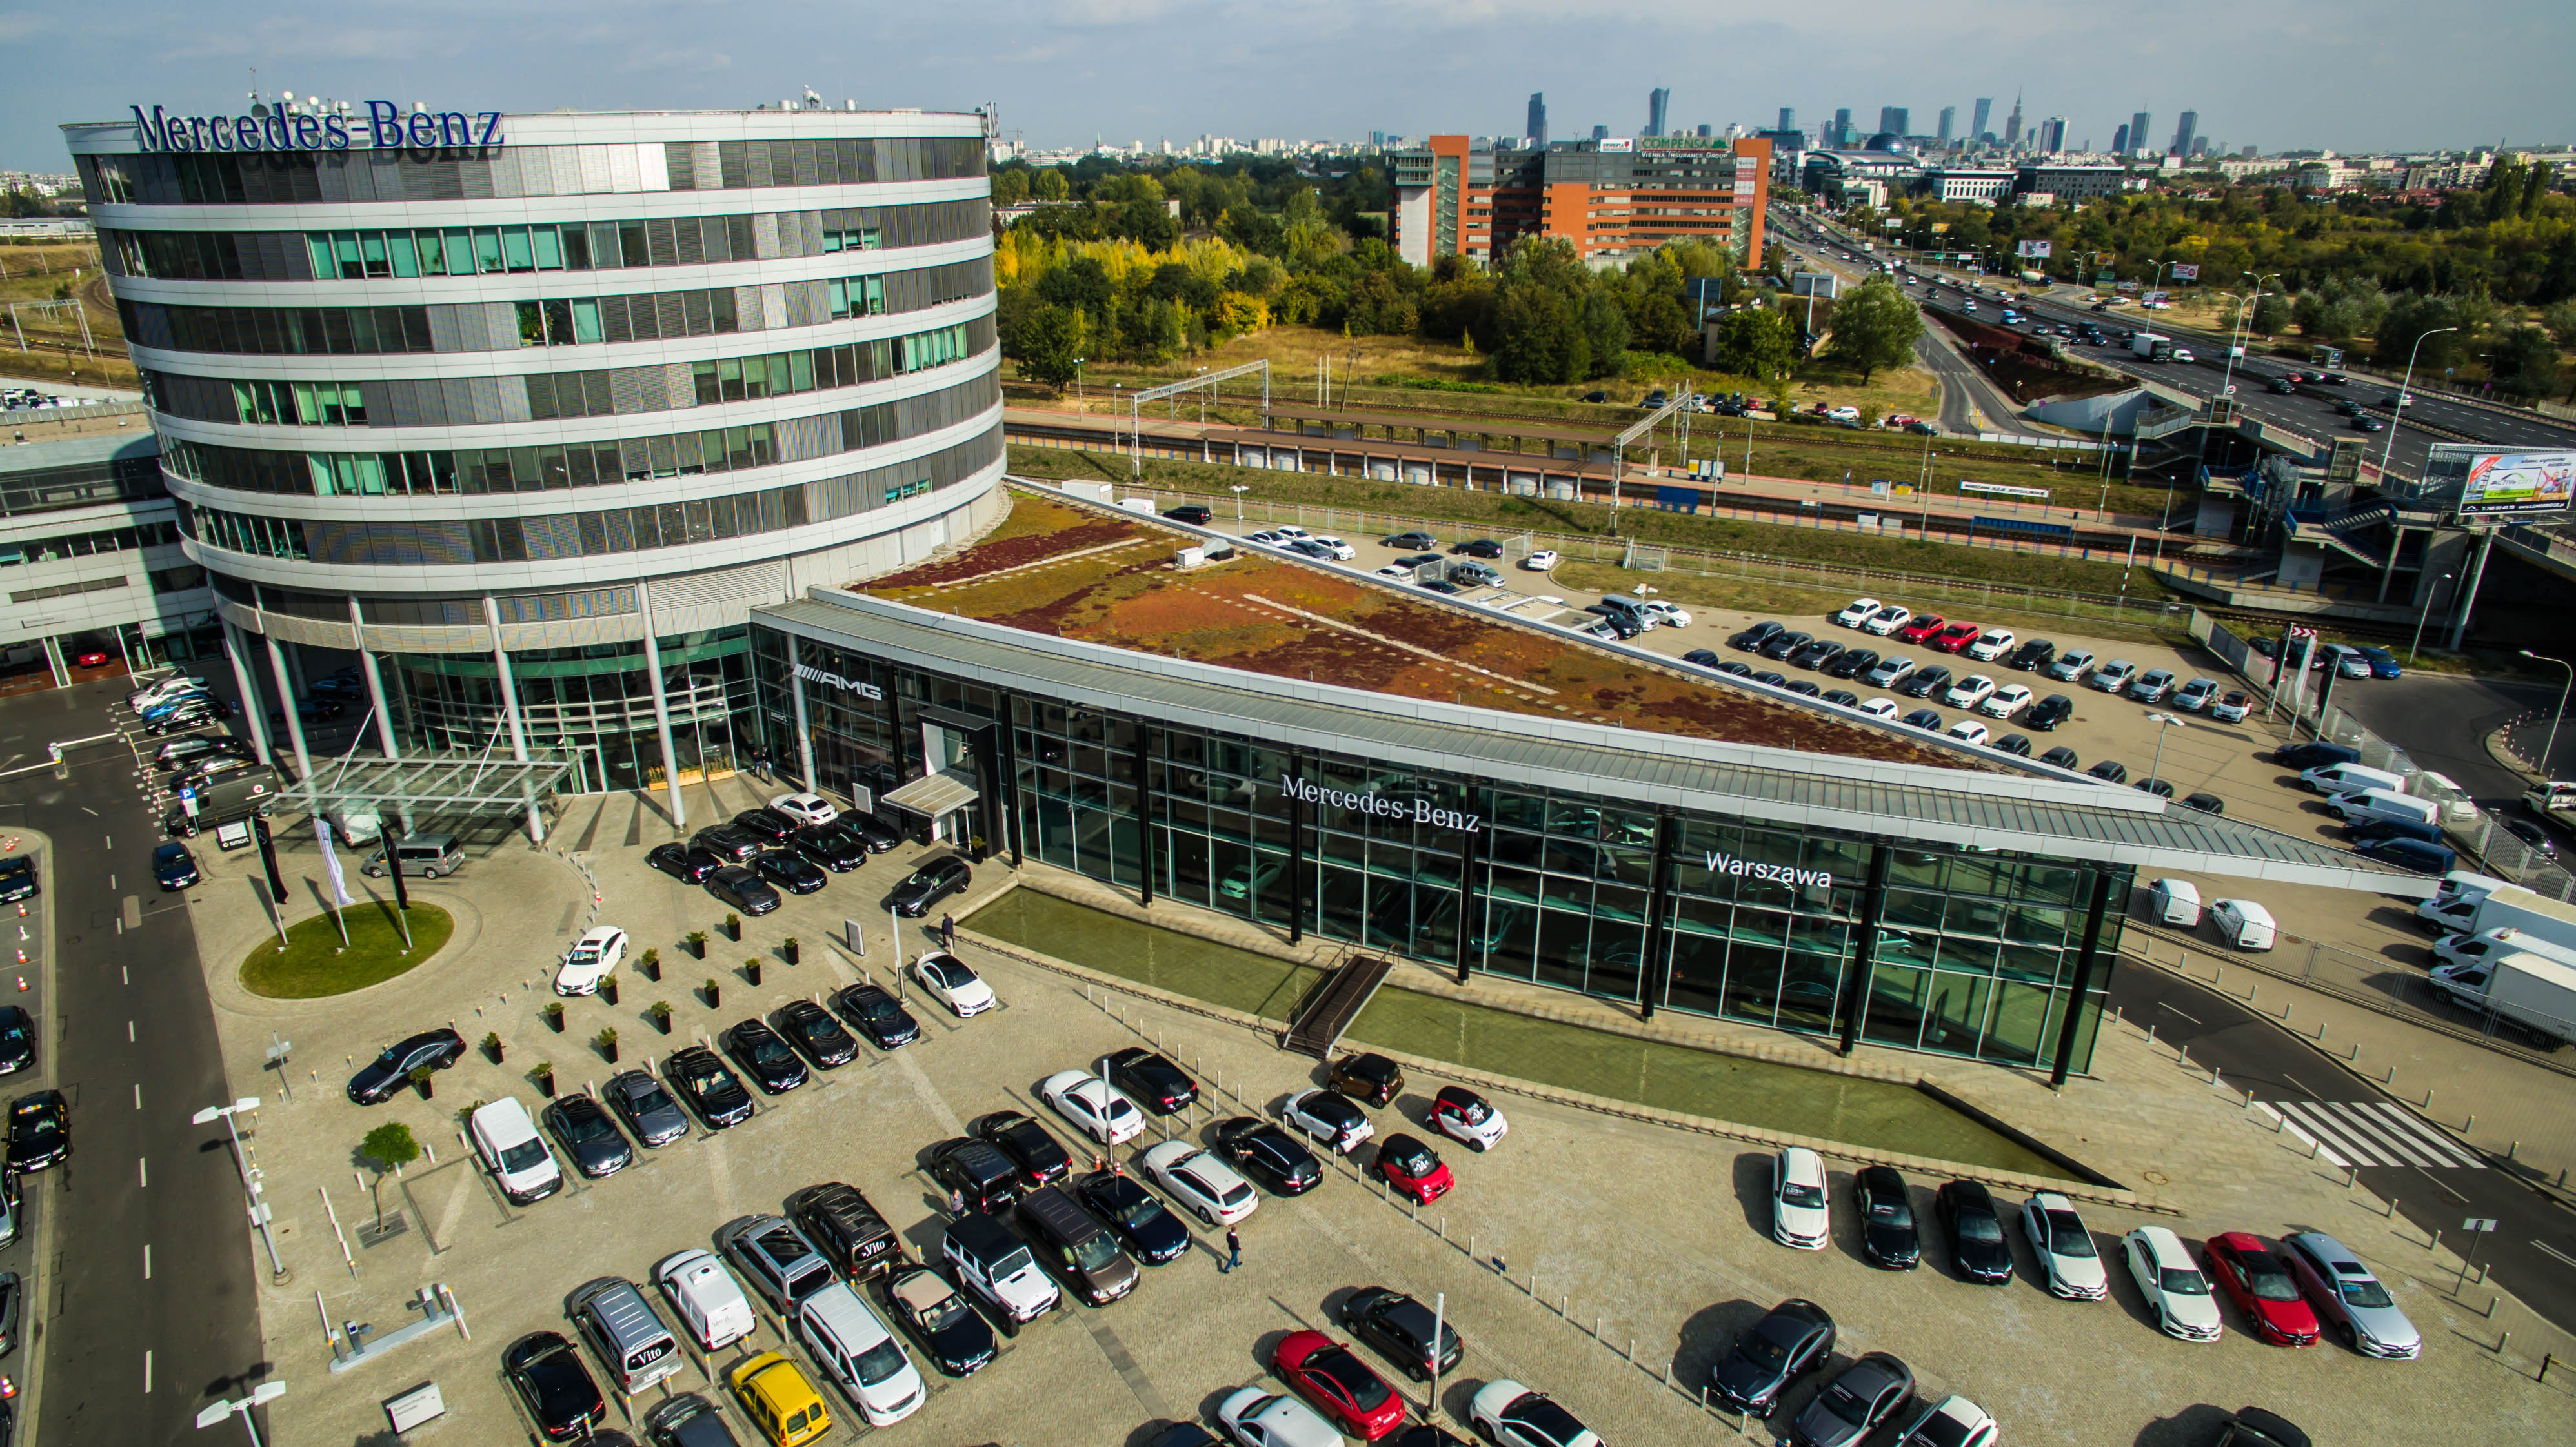 Mercedes-Benz building in Warsaw acquired by Adventum